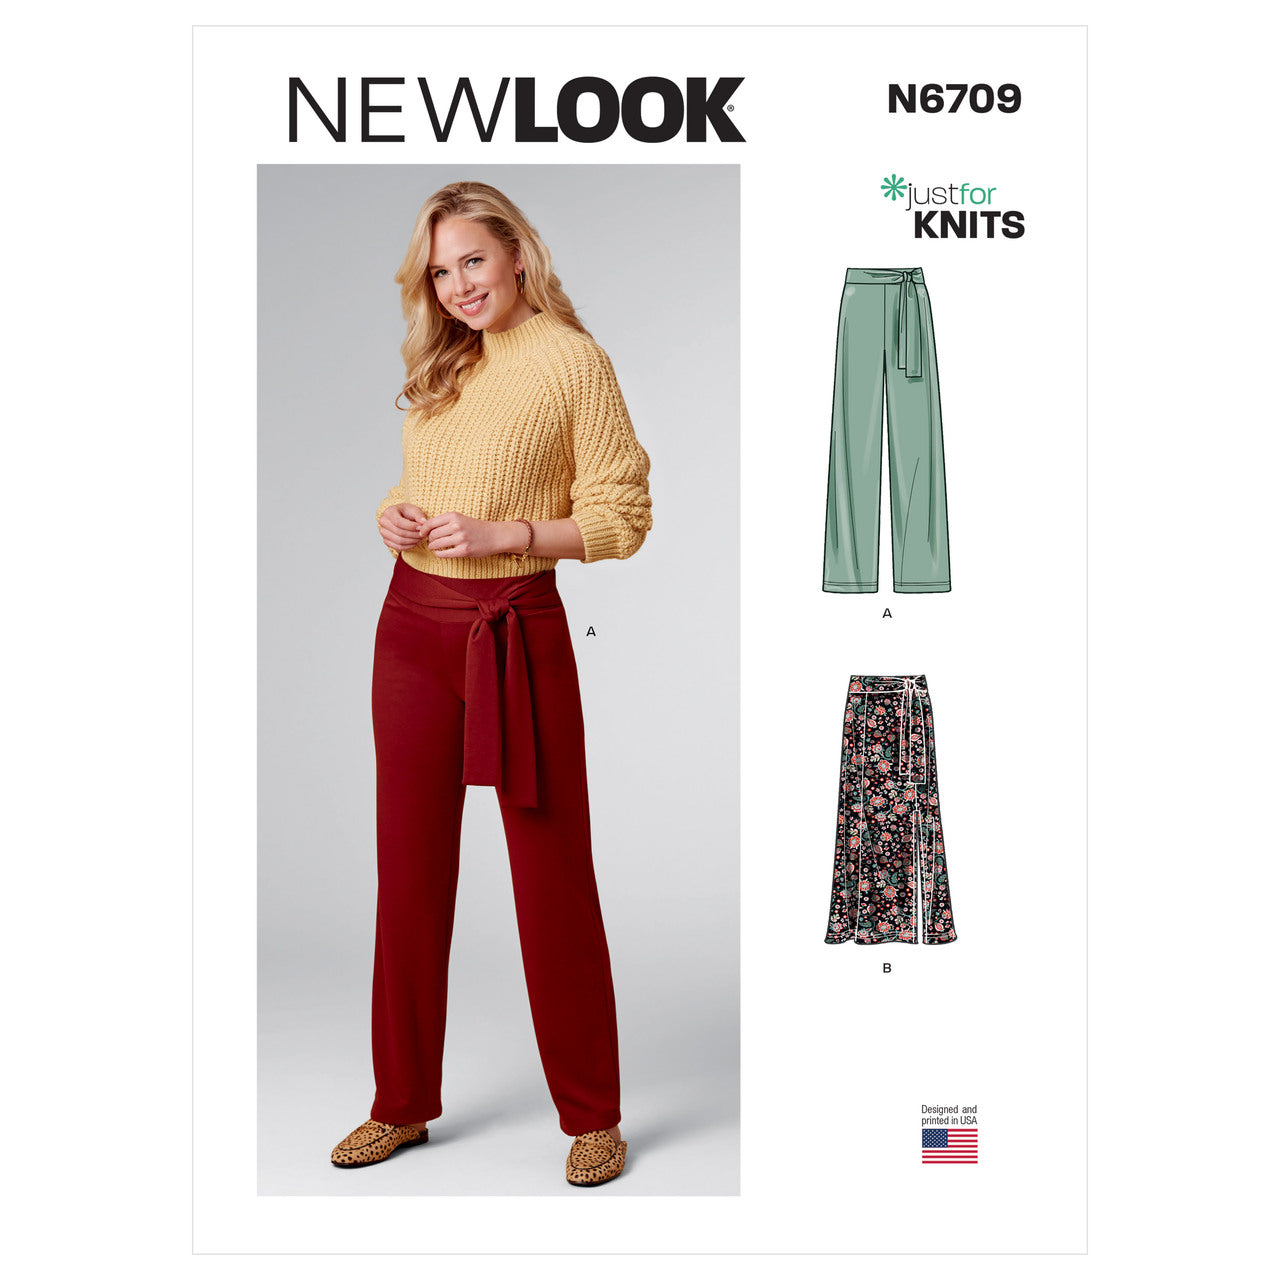 New Look Sewing Pattern N6709 Misses' Knits Only Pants and Skirt - You’ve Got Me In Stitches